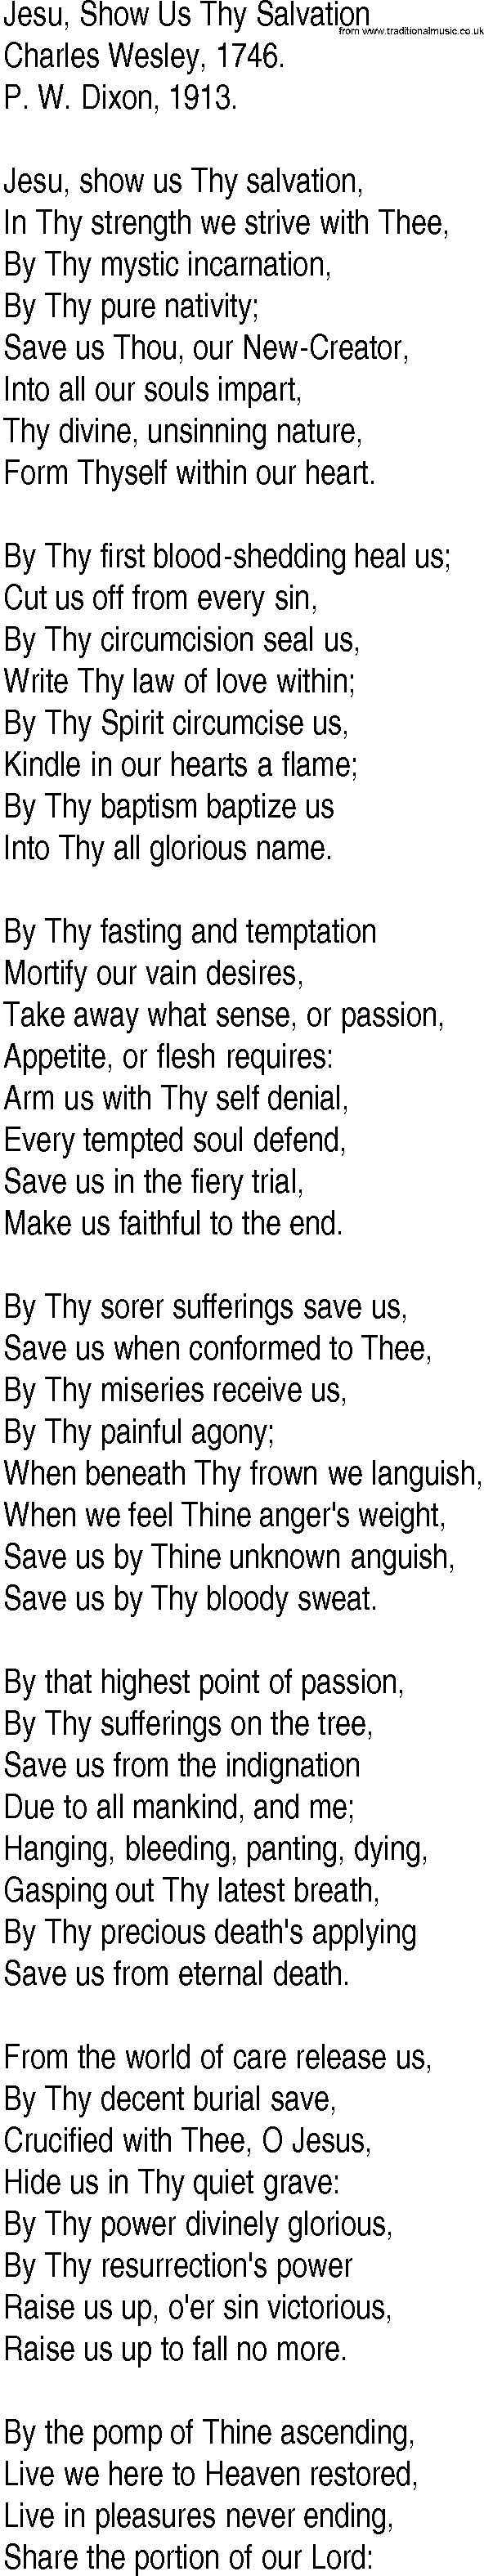 Hymn and Gospel Song: Jesu, Show Us Thy Salvation by Charles Wesley lyrics